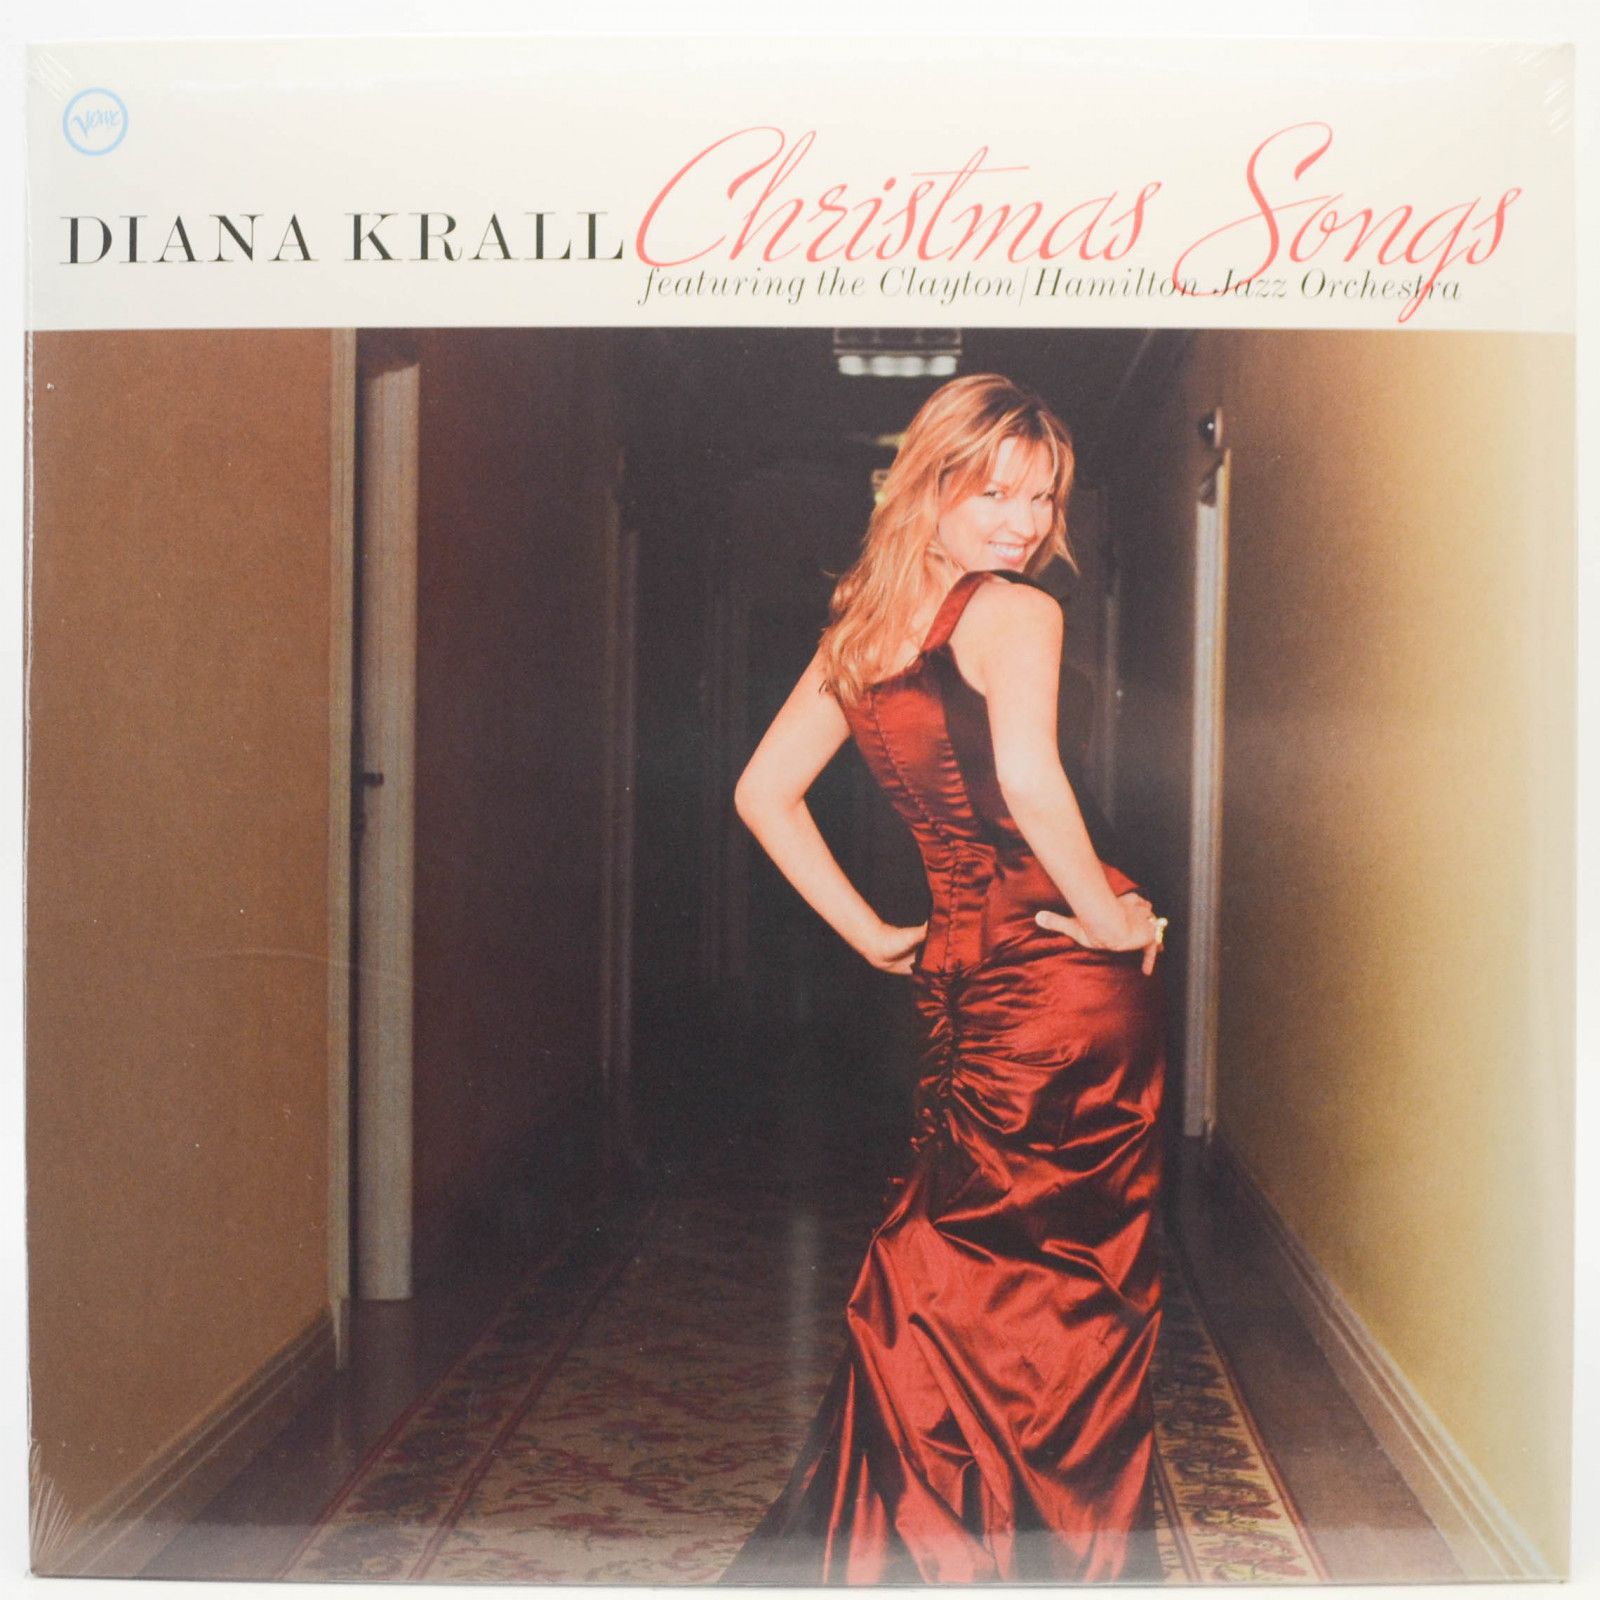 Diana Krall Featuring The Clayton/Hamilton Jazz Orchestra — Christmas Songs, 2005